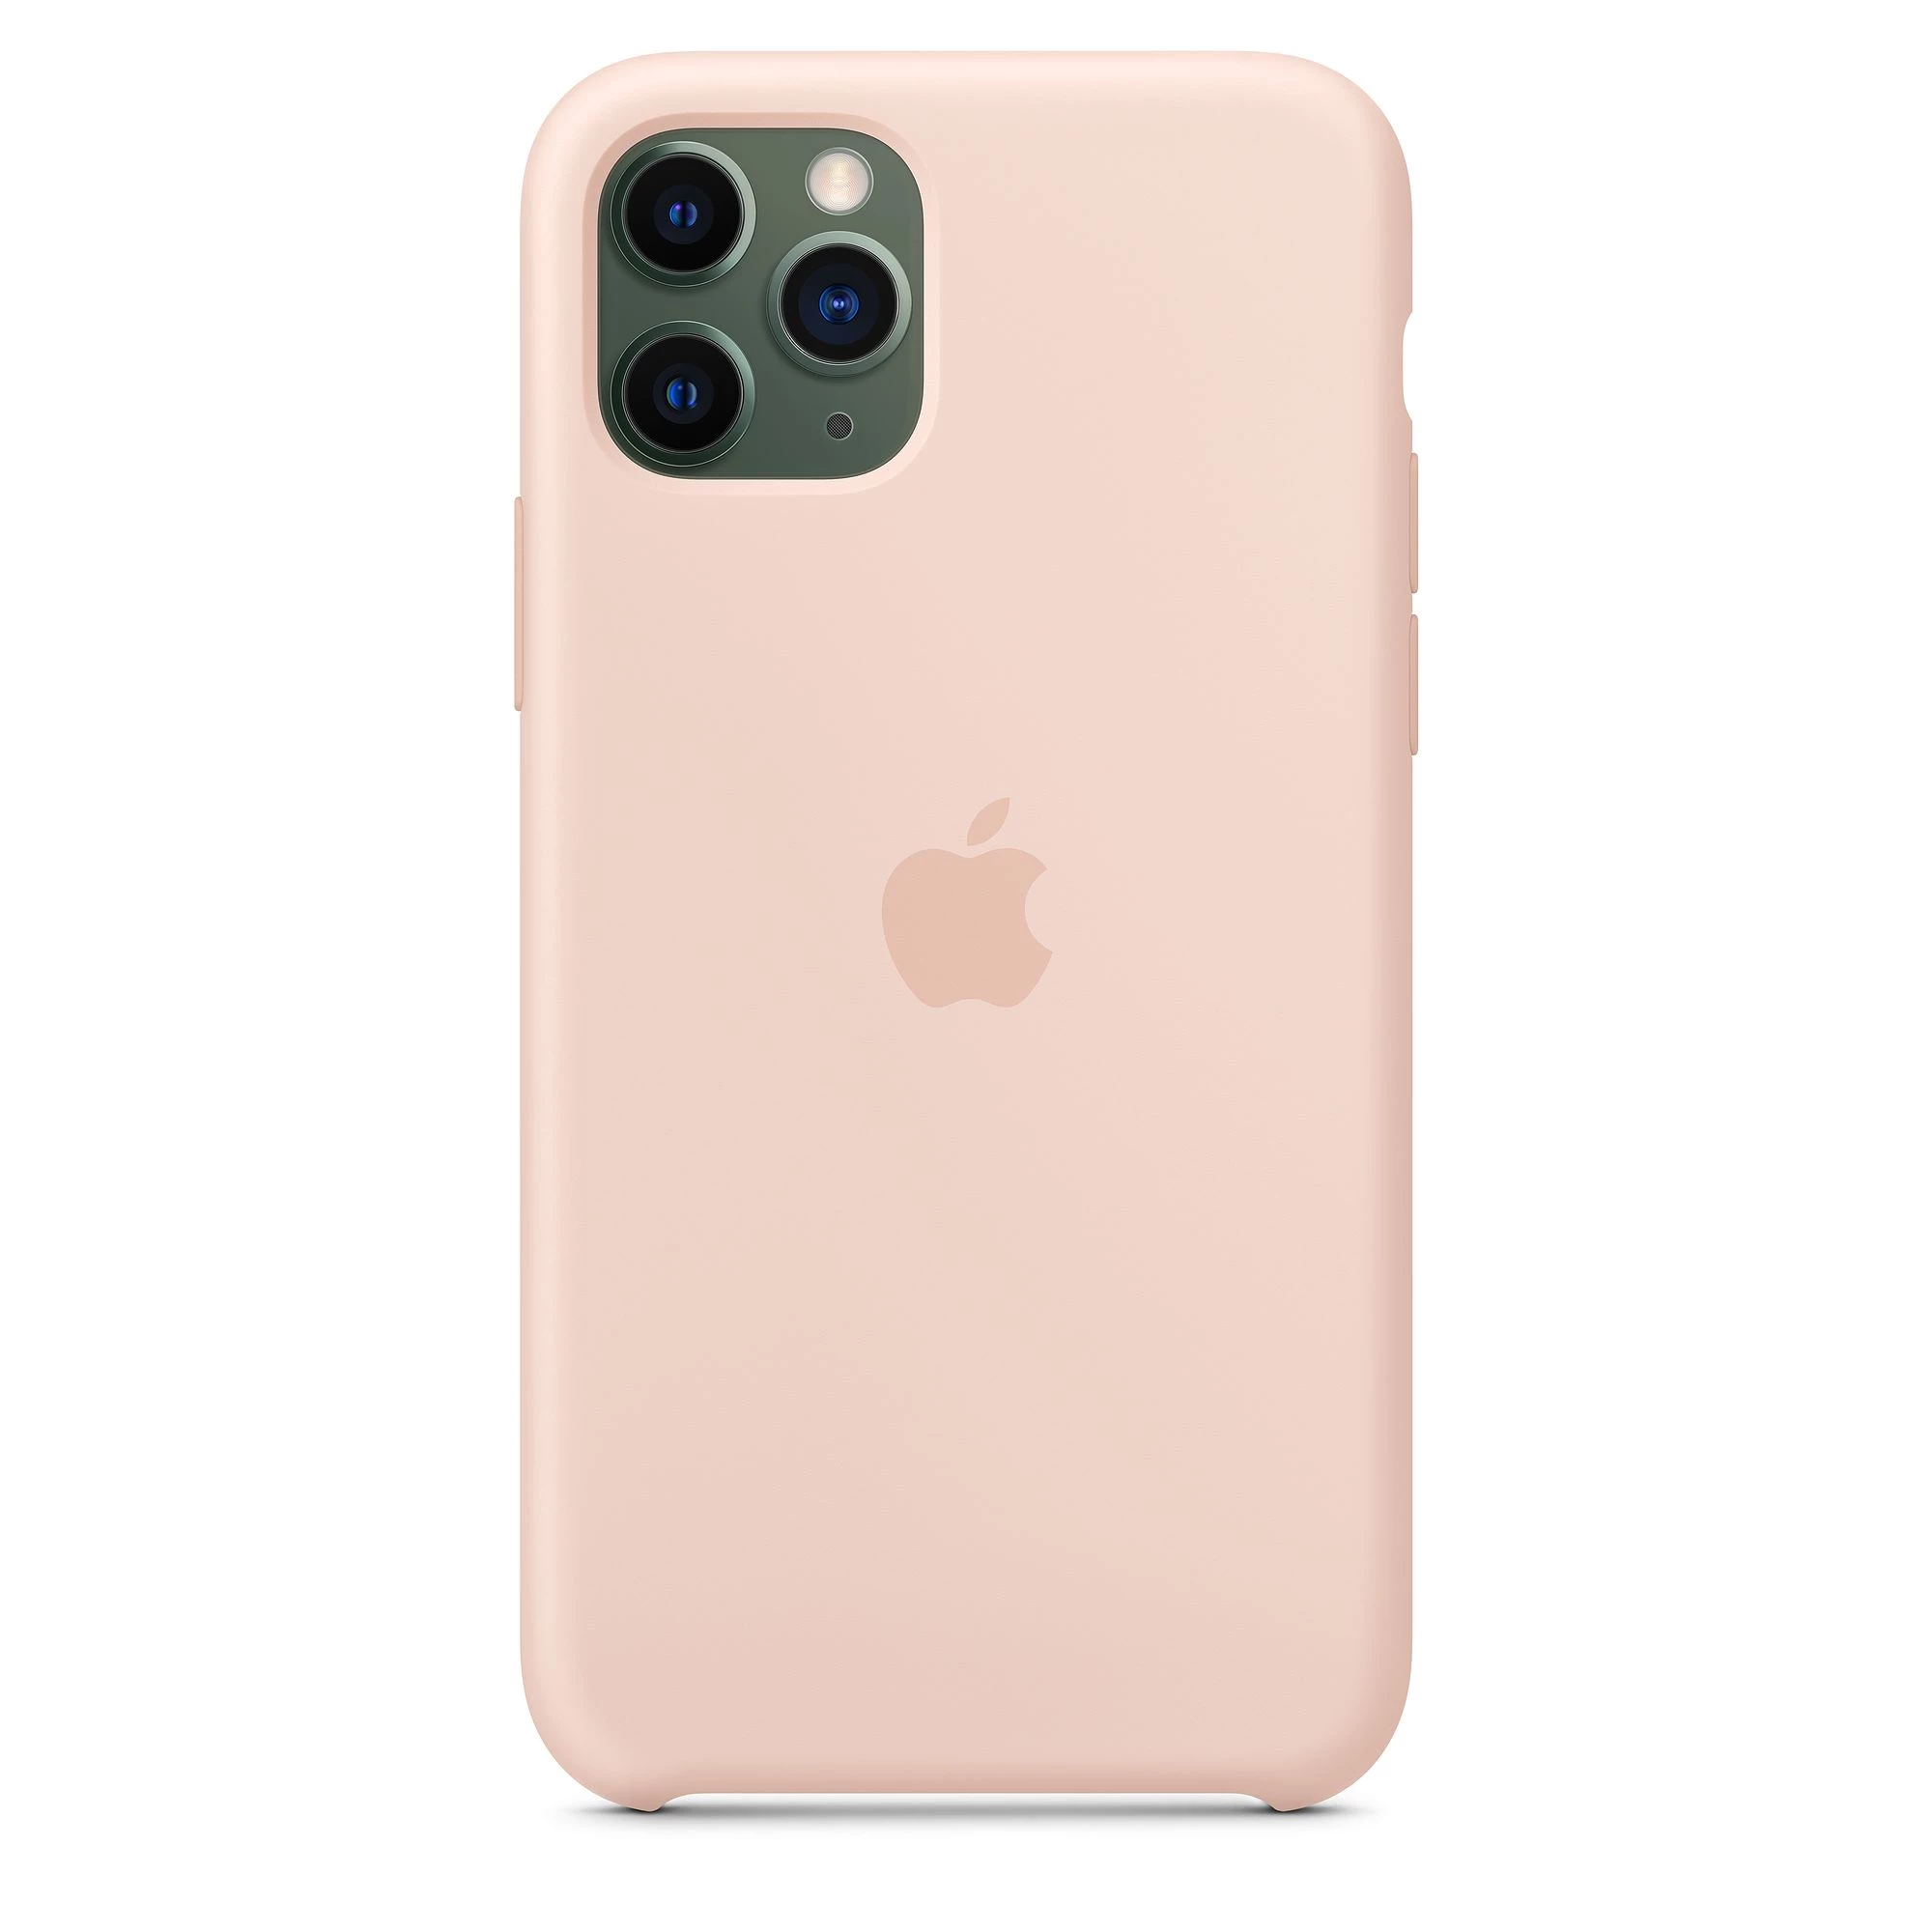 Apple iPhone 11 Pro Silicone Case LUX COPY- Pink Sand (MWYM2)